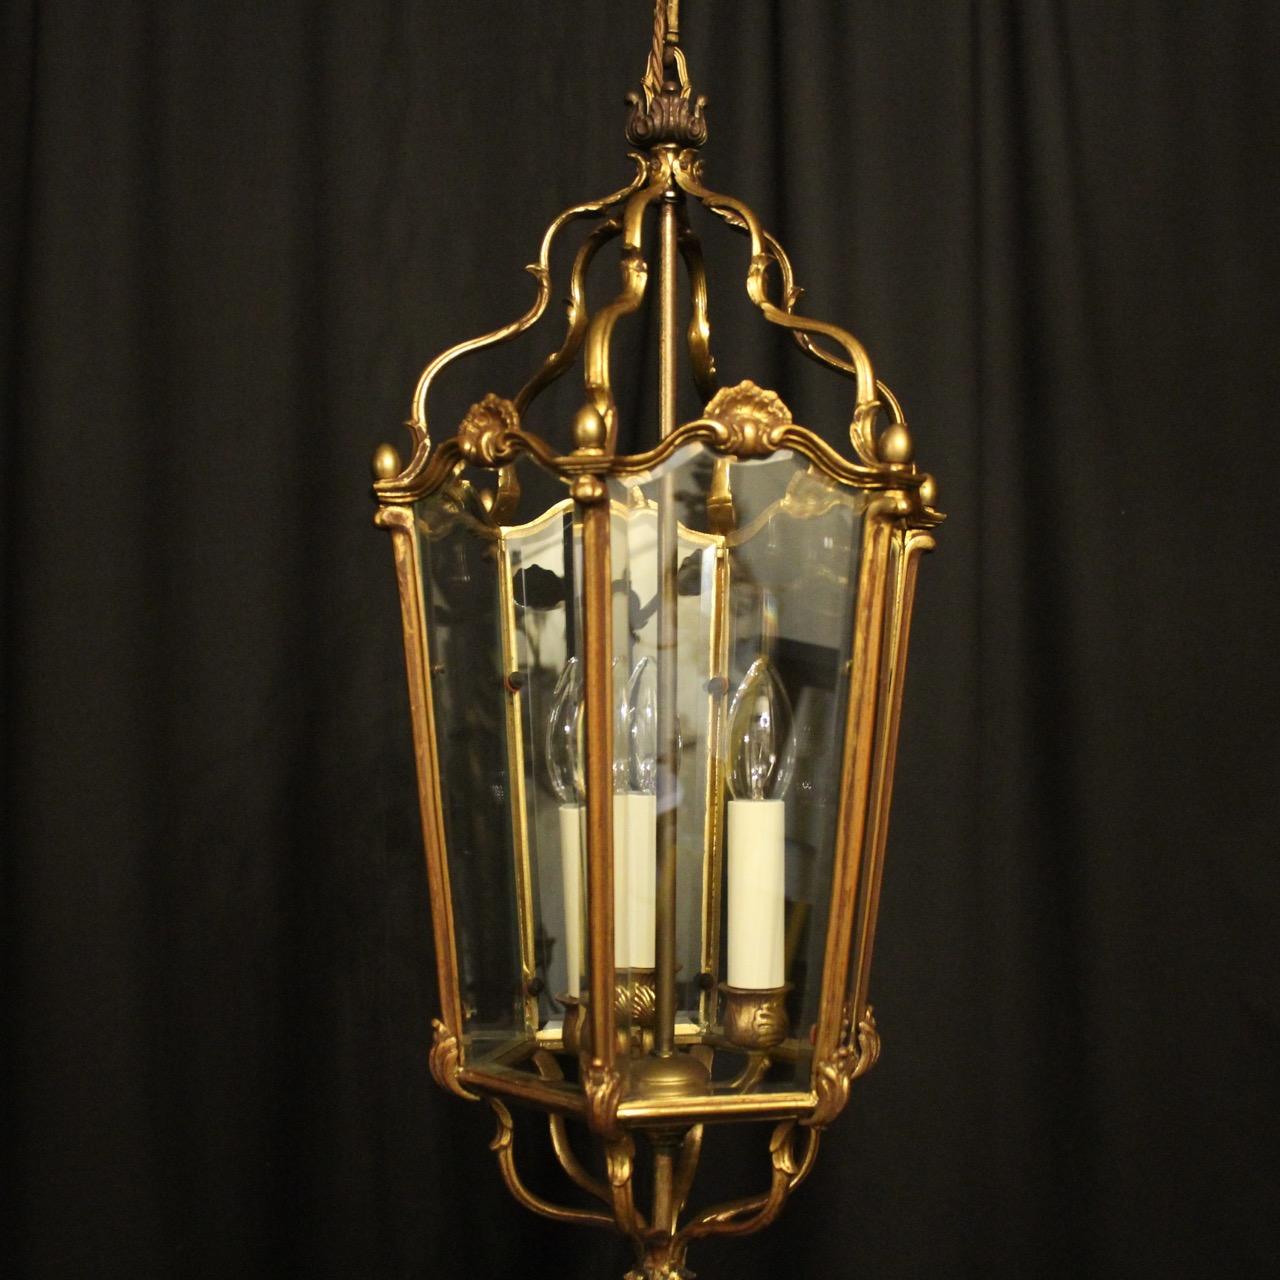 A French gilded bronze triple light hexagonal antique hall lantern, the six bevelled tapering glass panels held within an ornate scrolling framework with three light fittings and having decorative scrolled central shell embellishments, with edged